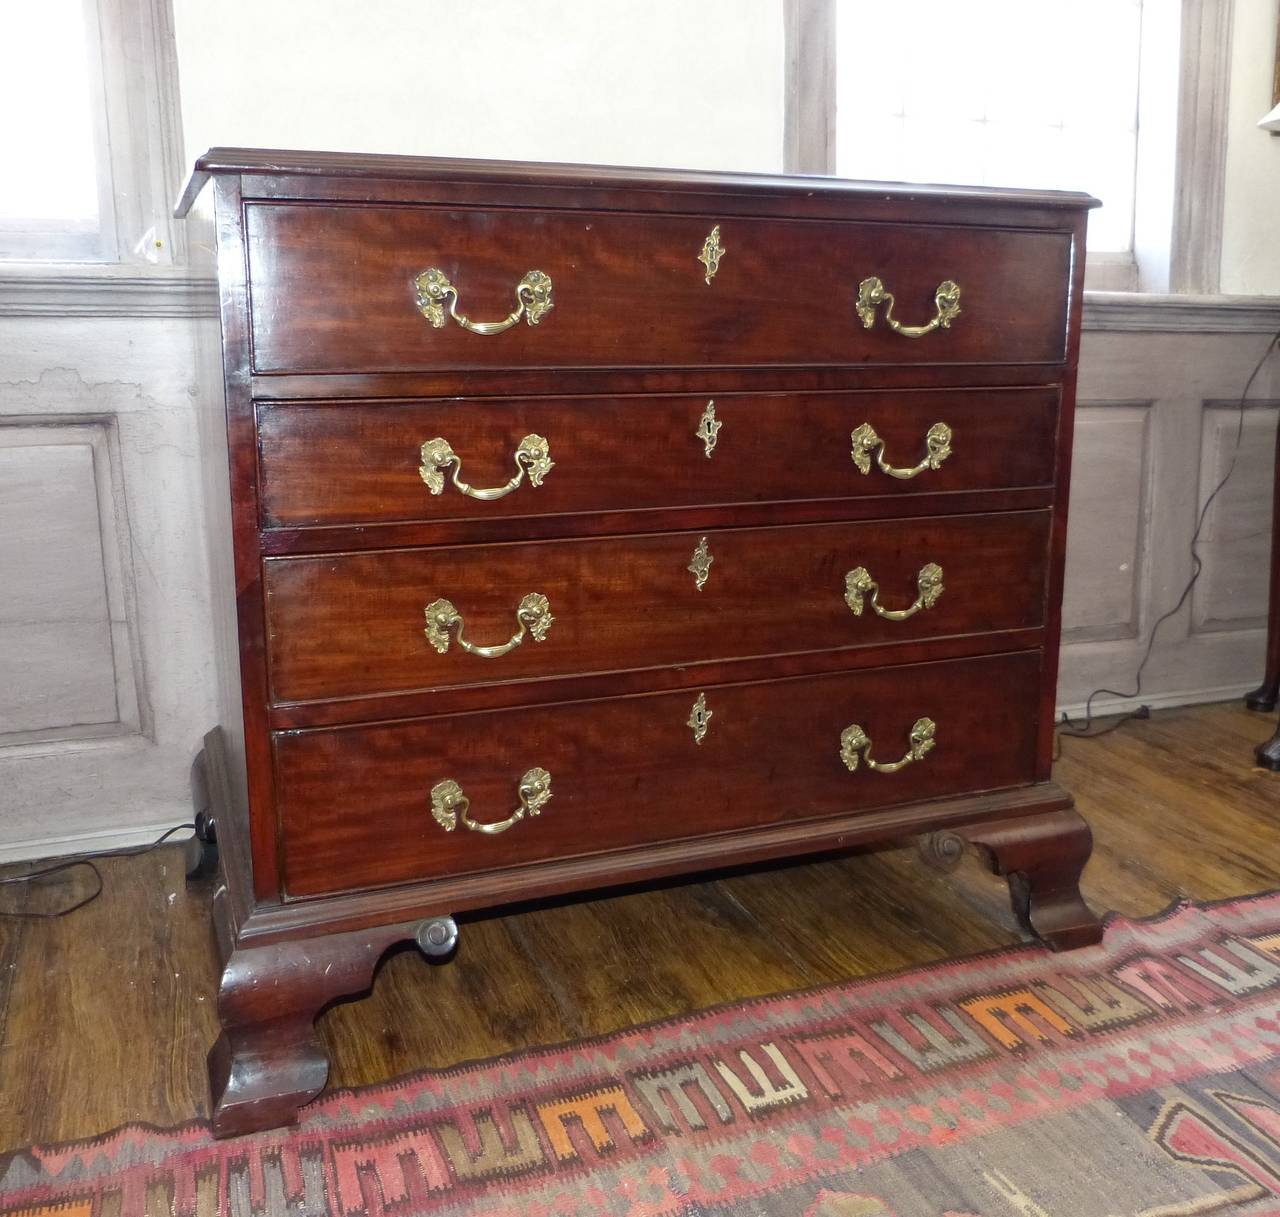 A handsome English 18th century George III Cuban mahogany Chippendale chest with a writing and reading pull-out top drawer on ogee shaped feet, circa 1770.